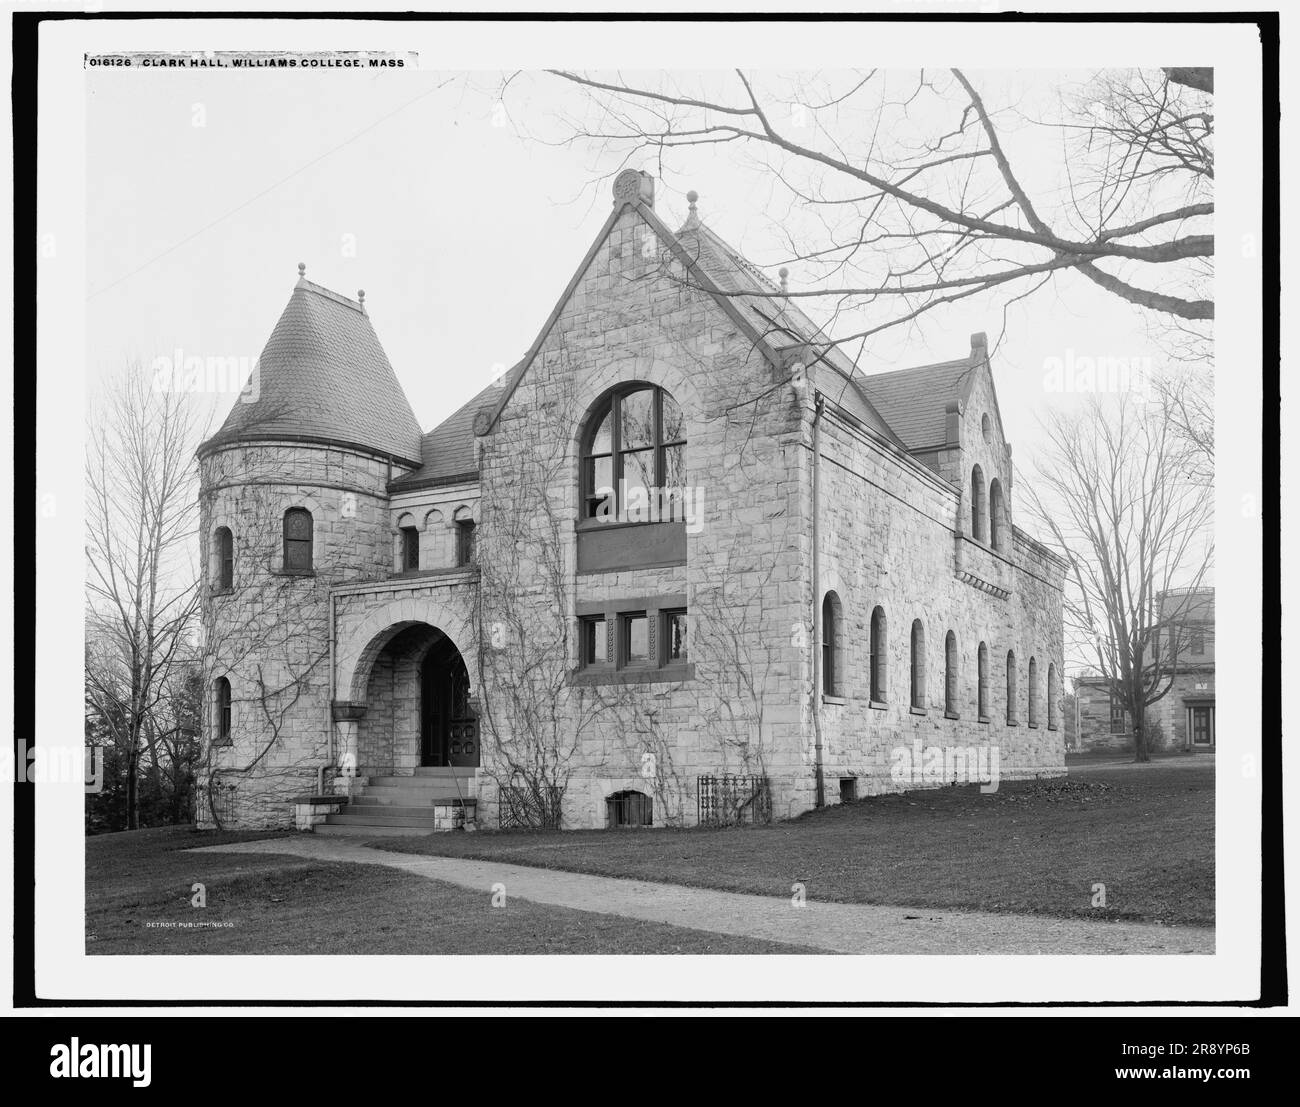 Clark Hall, Williams College, Mass., between 1900 and 1906. Stock Photo